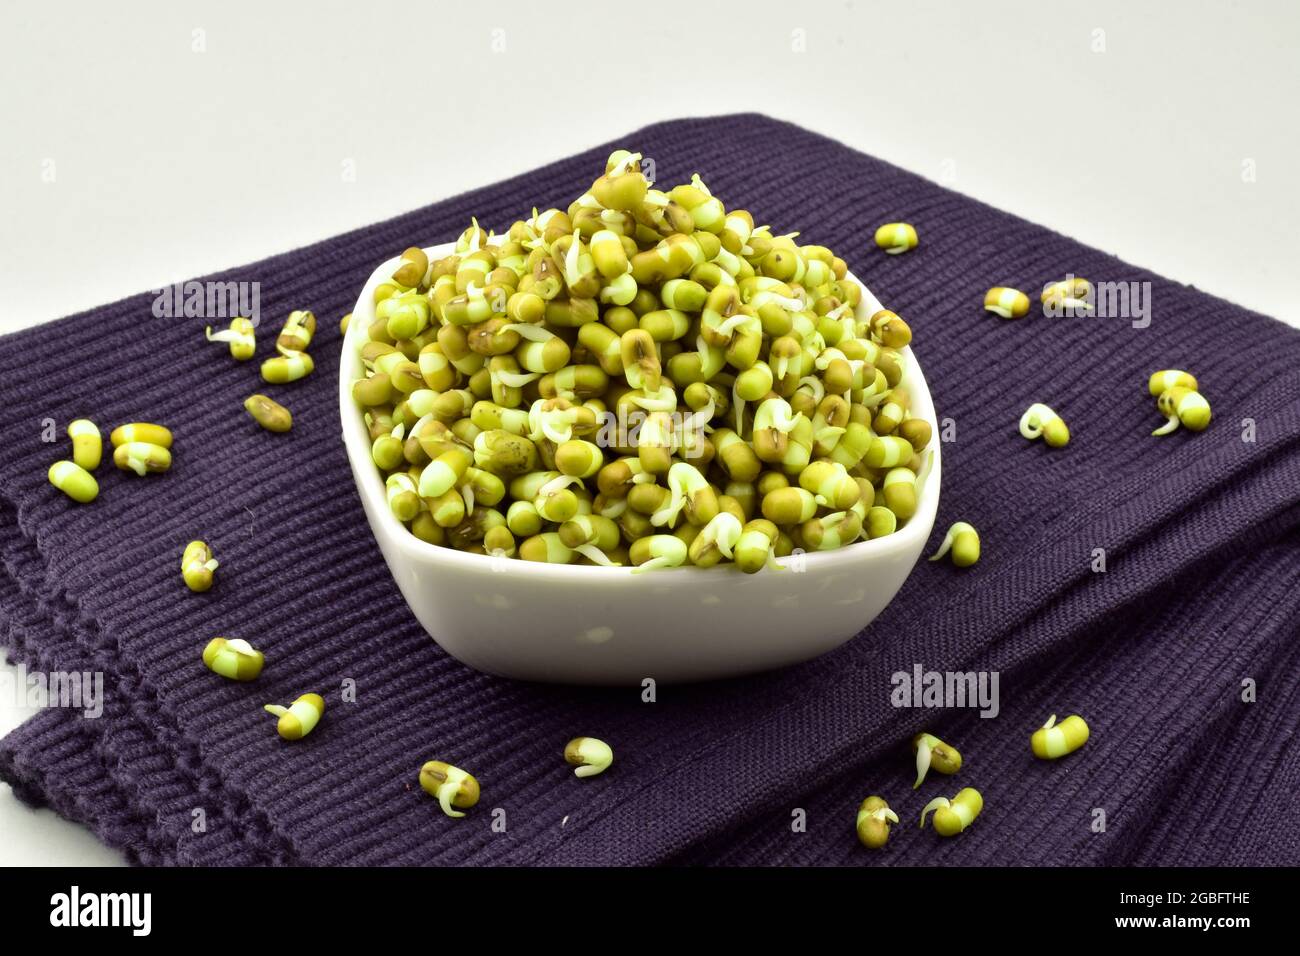 Sprouted Mung Bean In Bowl On White Background Stock Photo